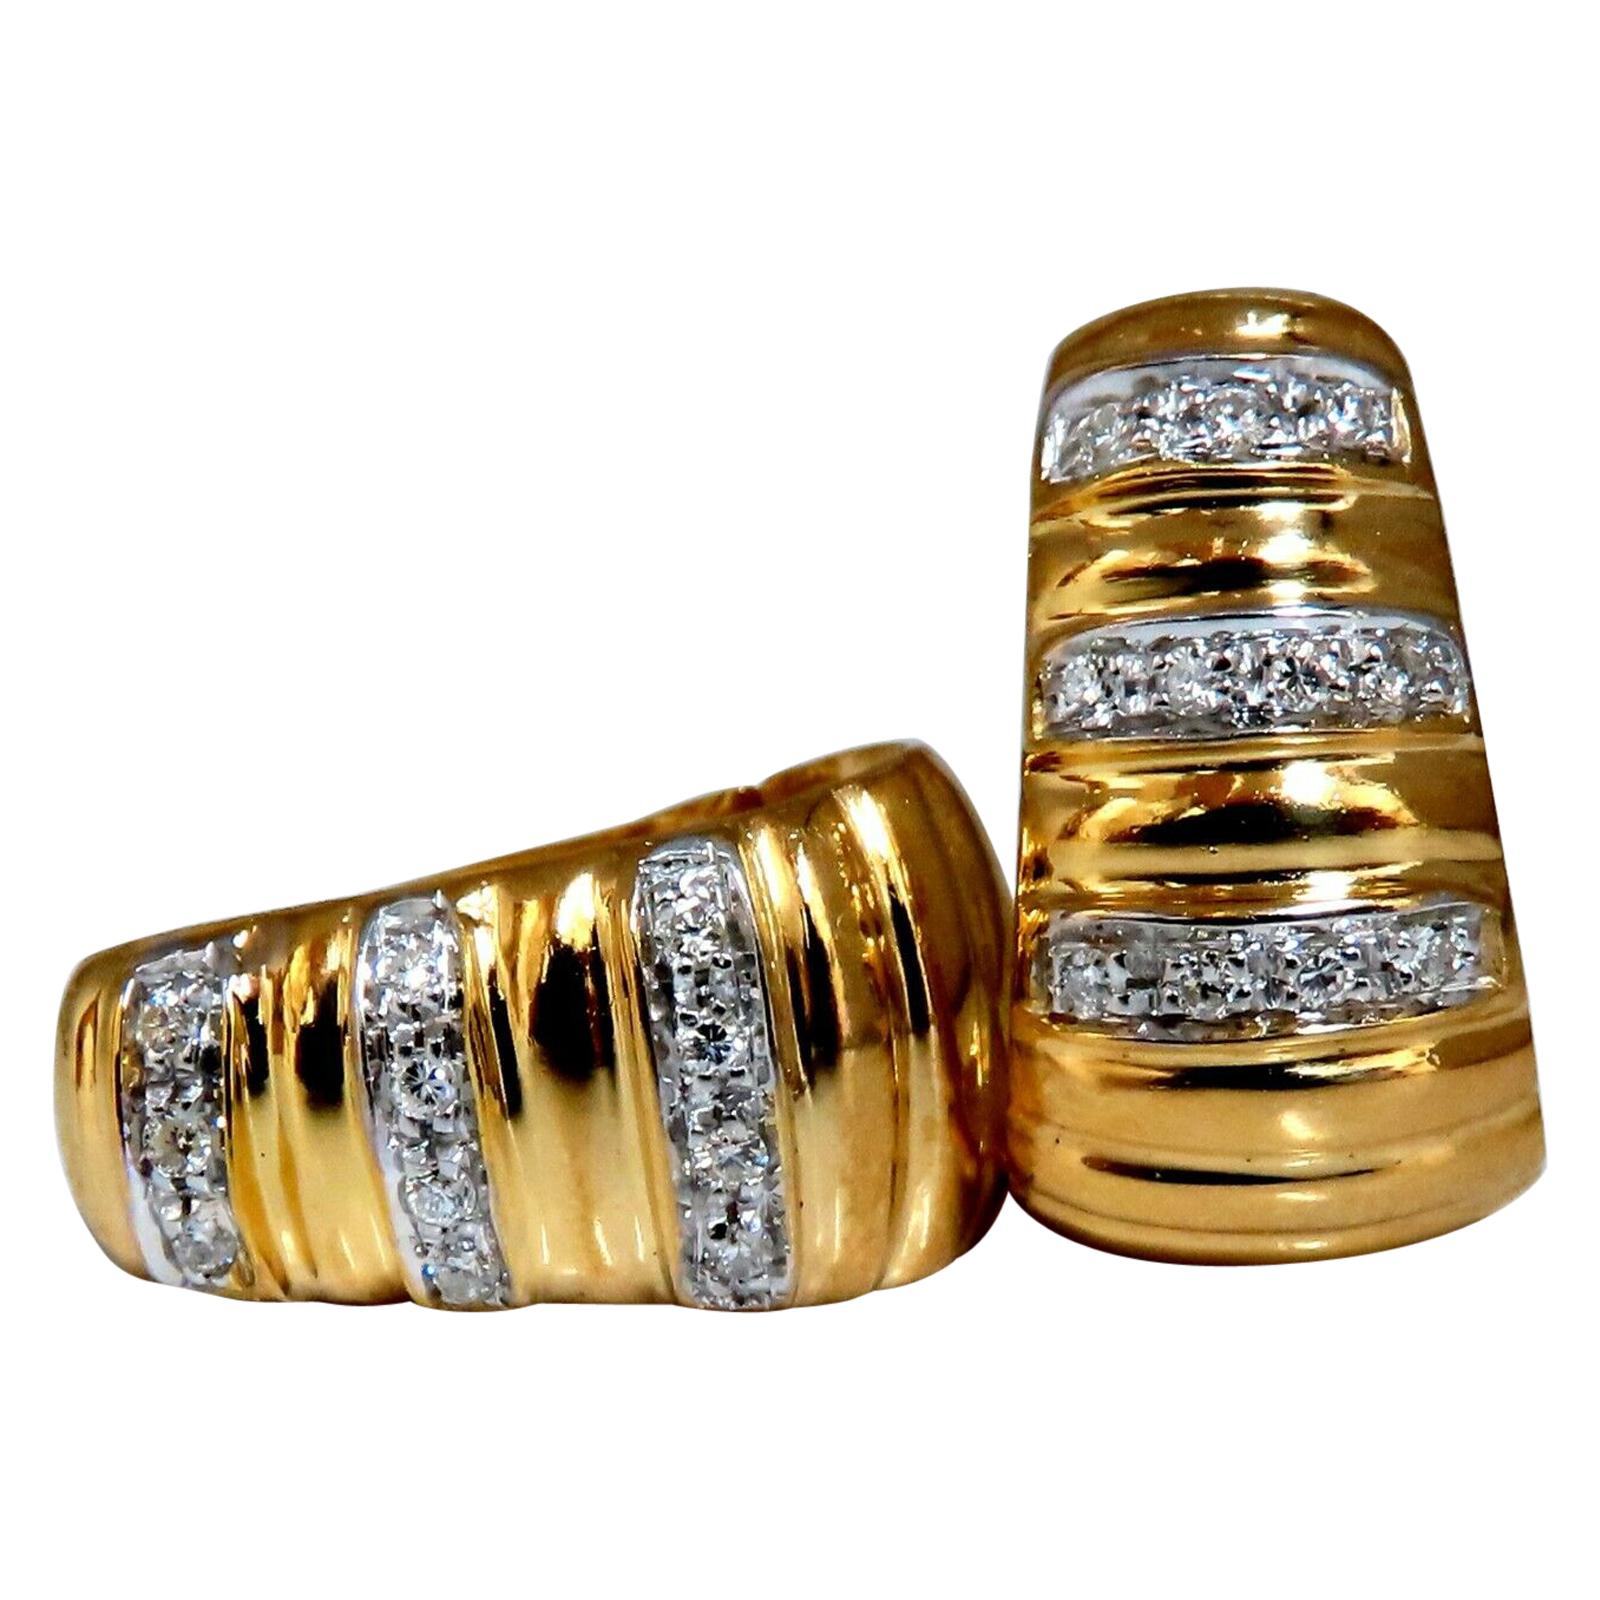 .36 Carat Natural Diamonds Stripped Staggered Row Bead Set Earrings 18 Karat For Sale